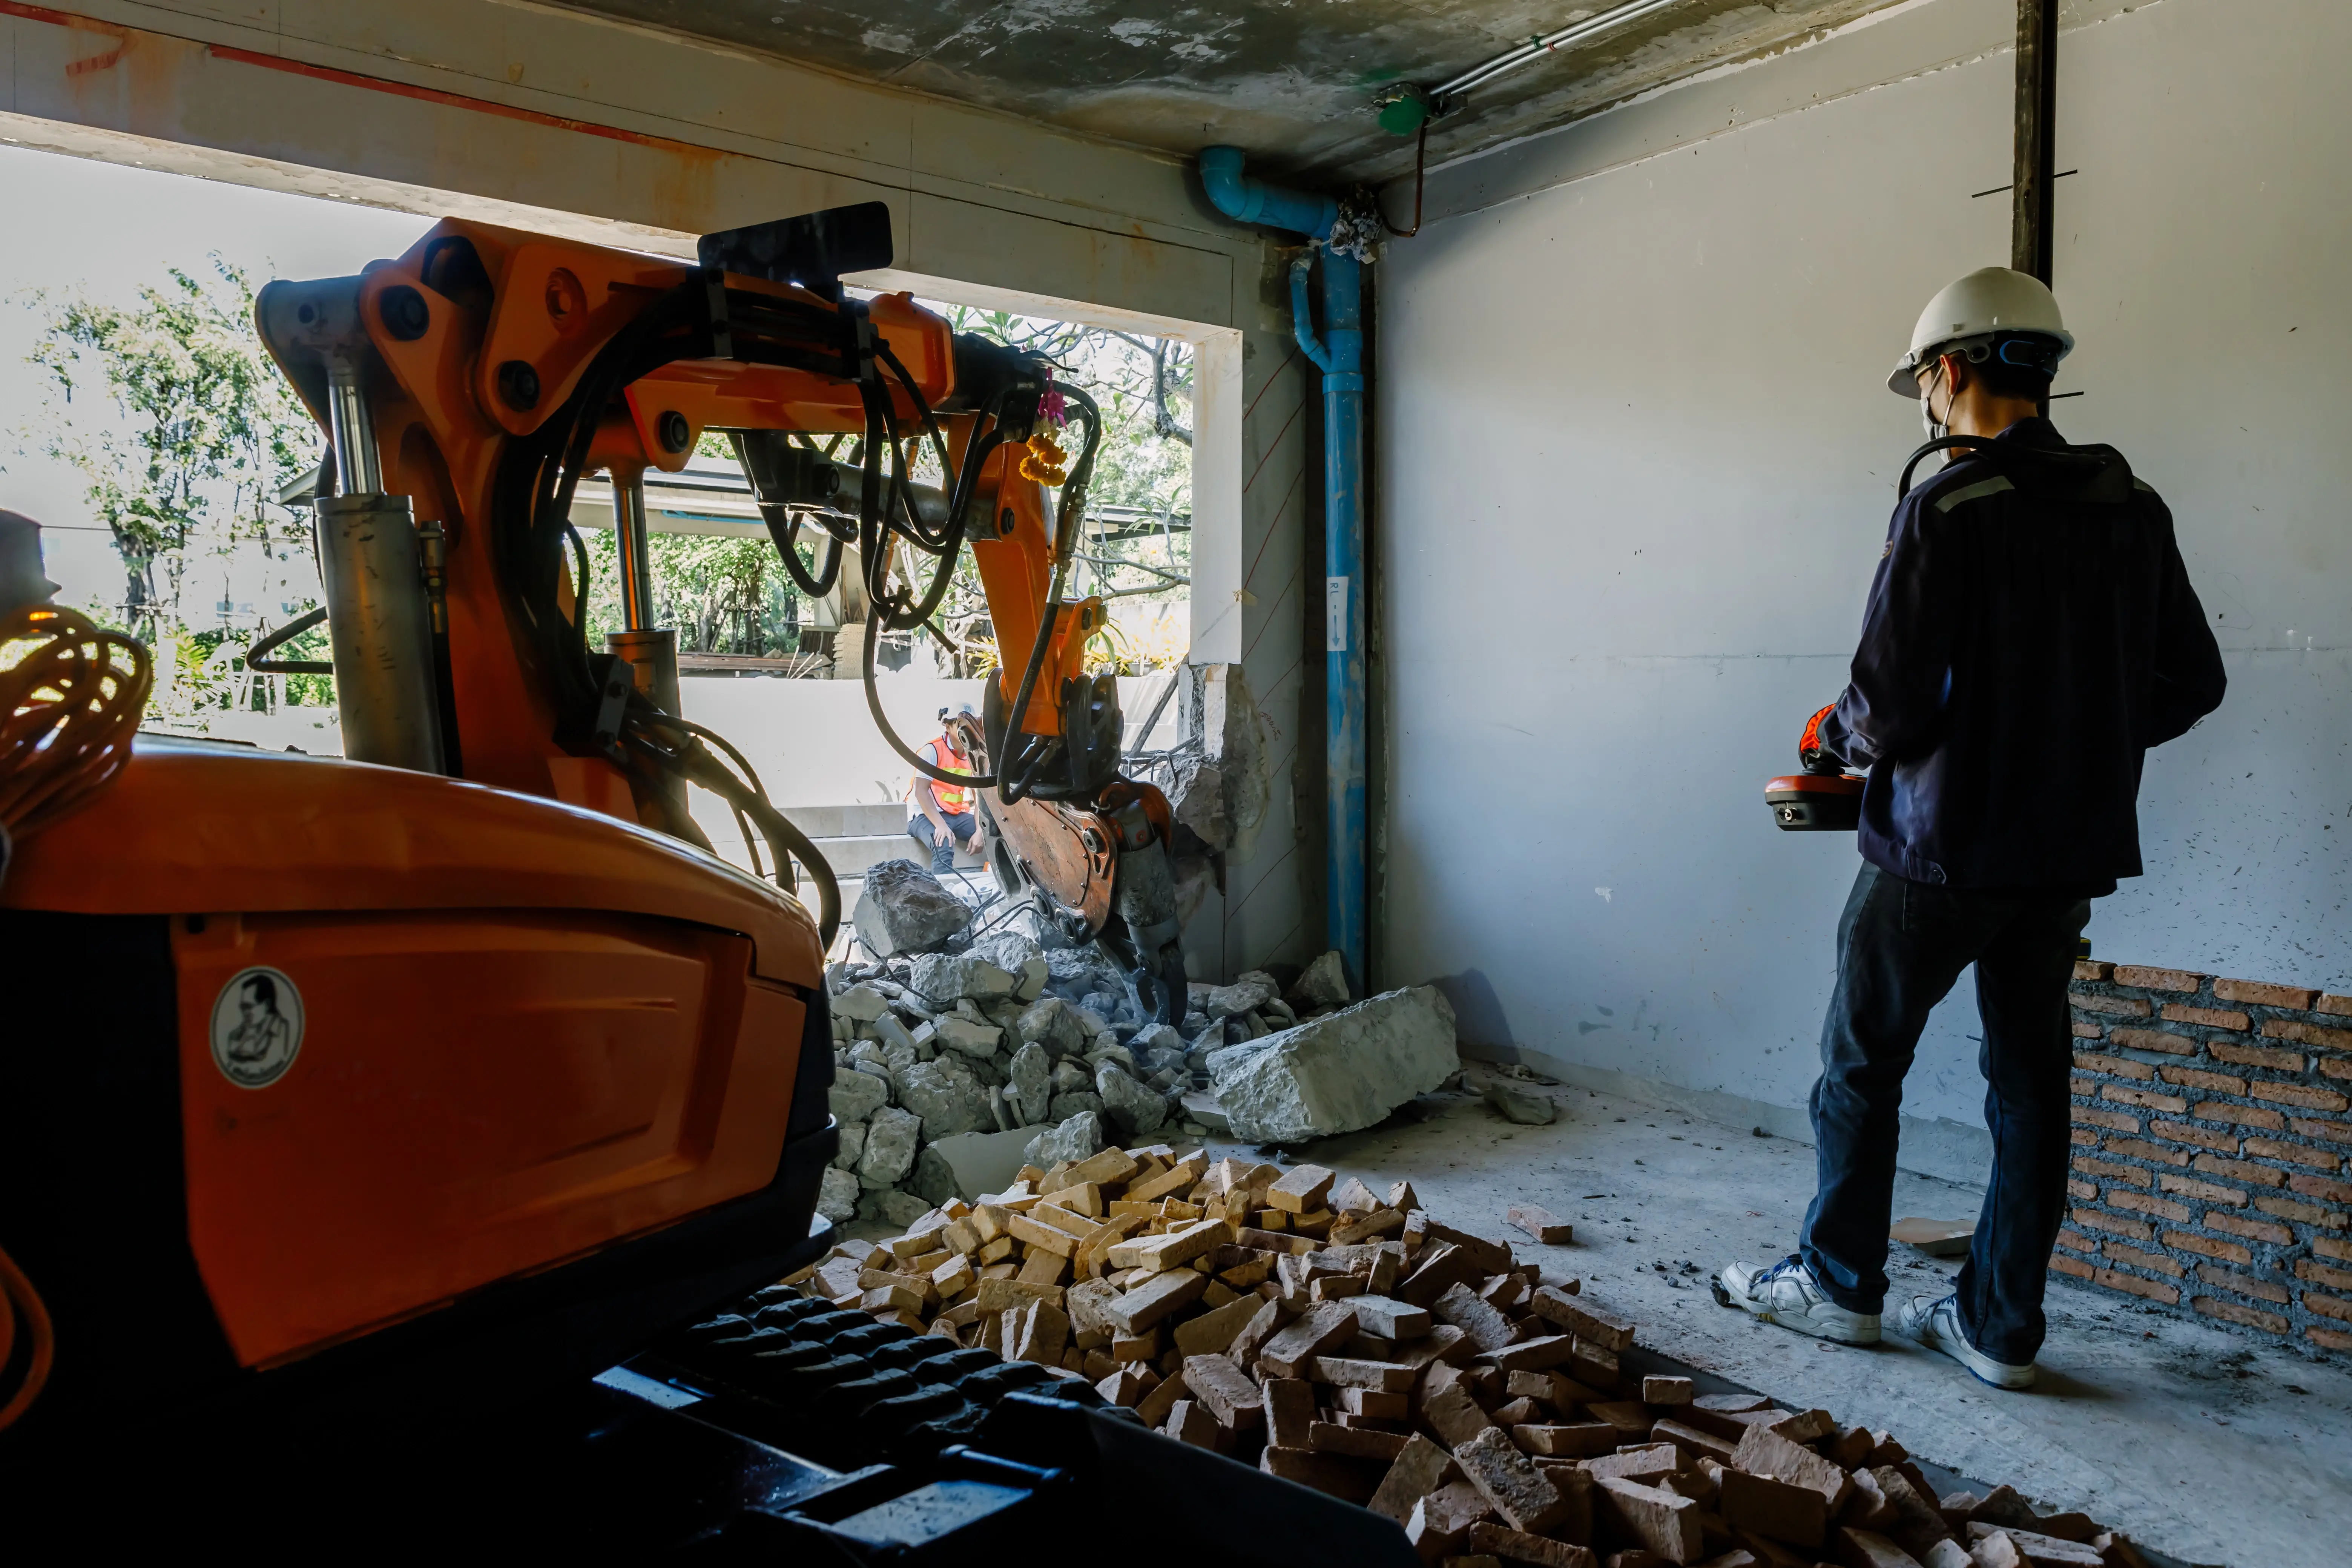 Construction worker operating a hydraulic breaker for concrete excavation inside a building in Philadelphia